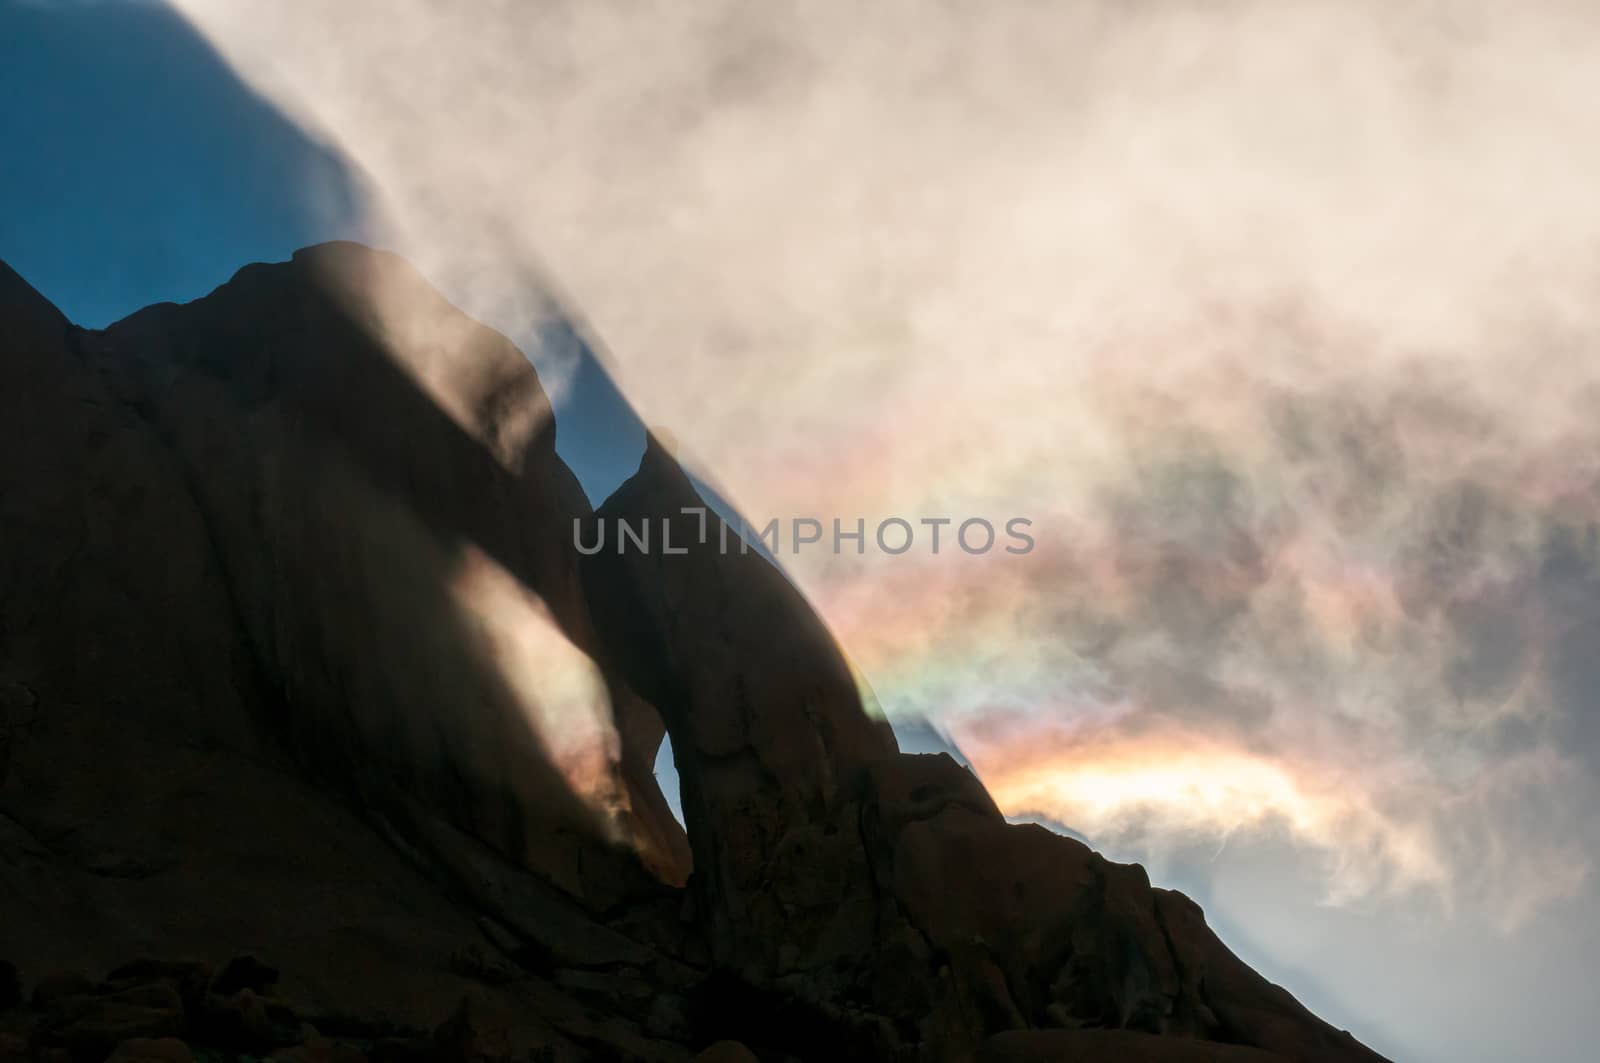 Reflections and diffraction are visible in the clouds at the Greater Spitzkoppe during sunrise